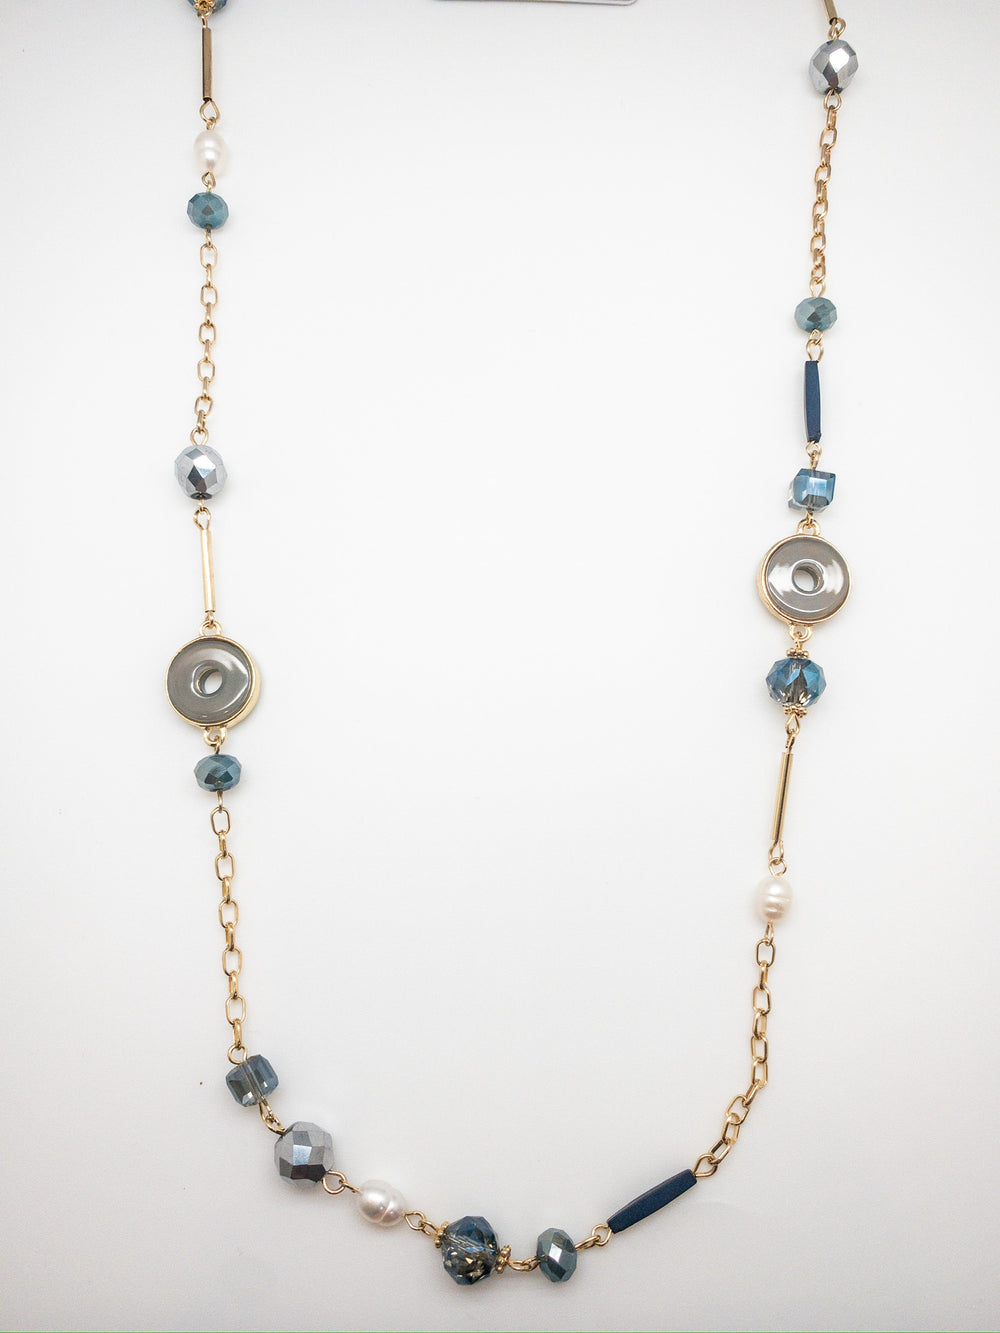 Faryn Necklace. Gold chained with blue and pearl bead accents